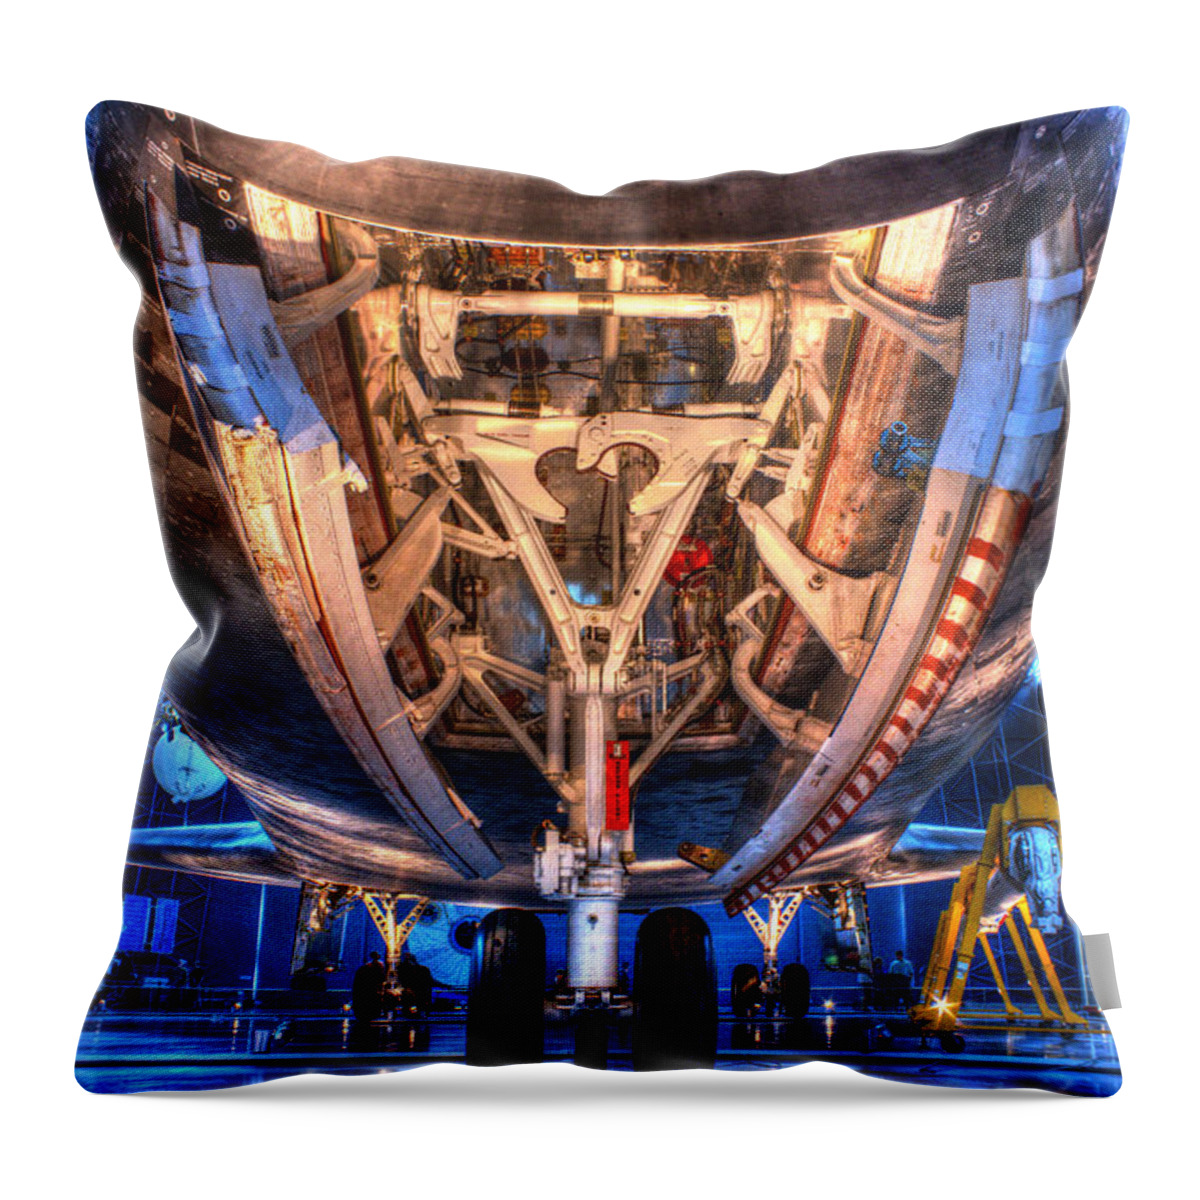 Nose Gear Throw Pillow featuring the photograph Shuttle Discovery Nose Gear and Bay by ELDavis Photography